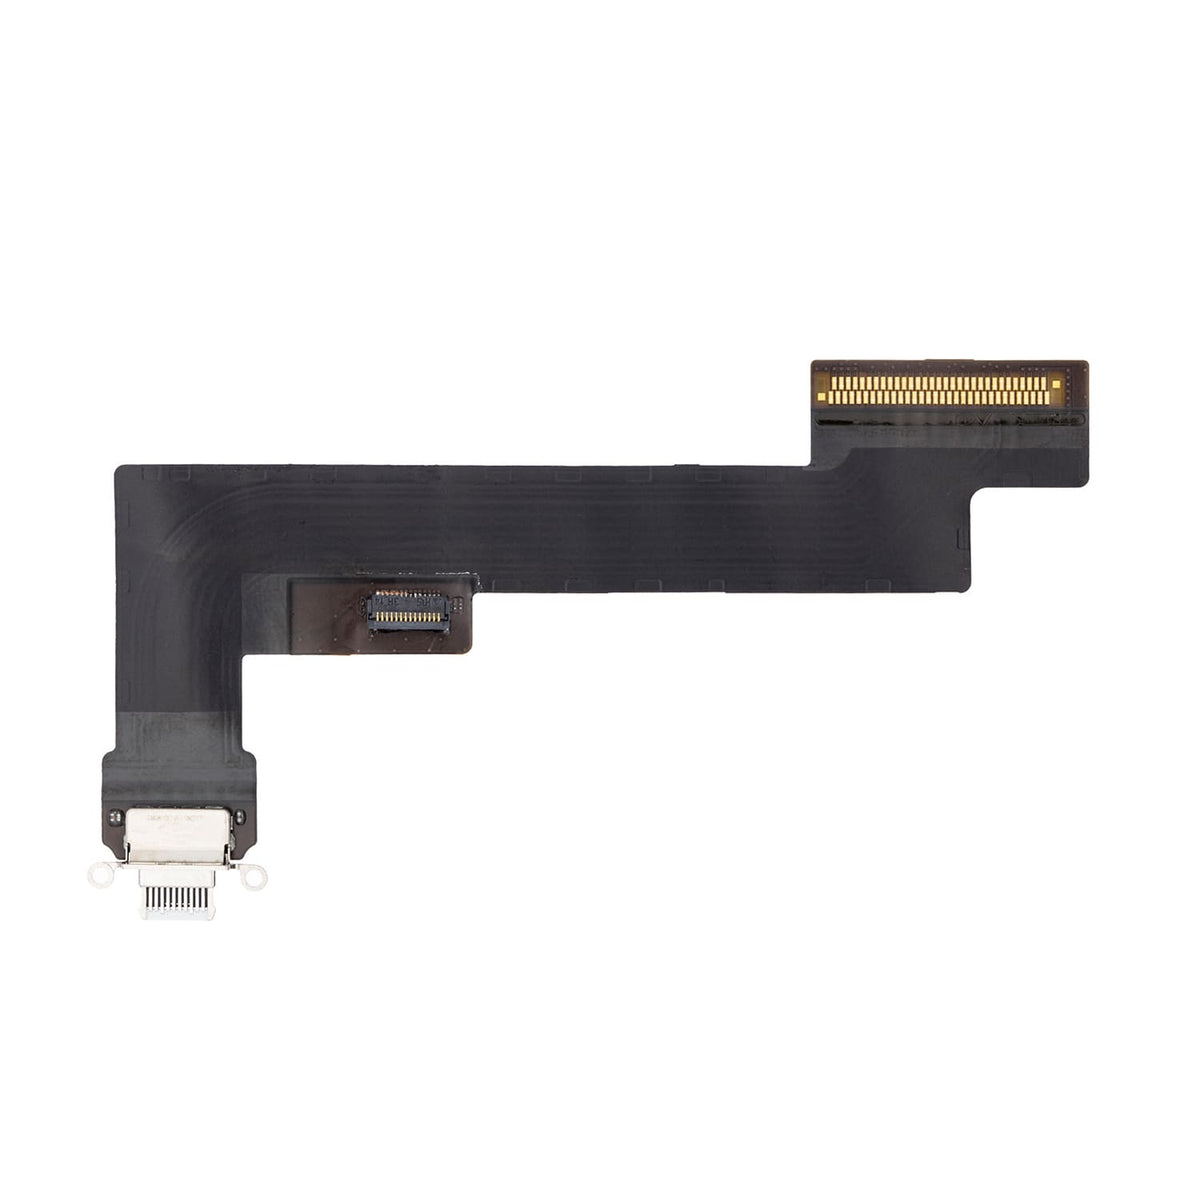 WHITE CHARGING CONNECTOR FLEX CABLE FOR IPAD AIR 4/5 WIFI VERSION